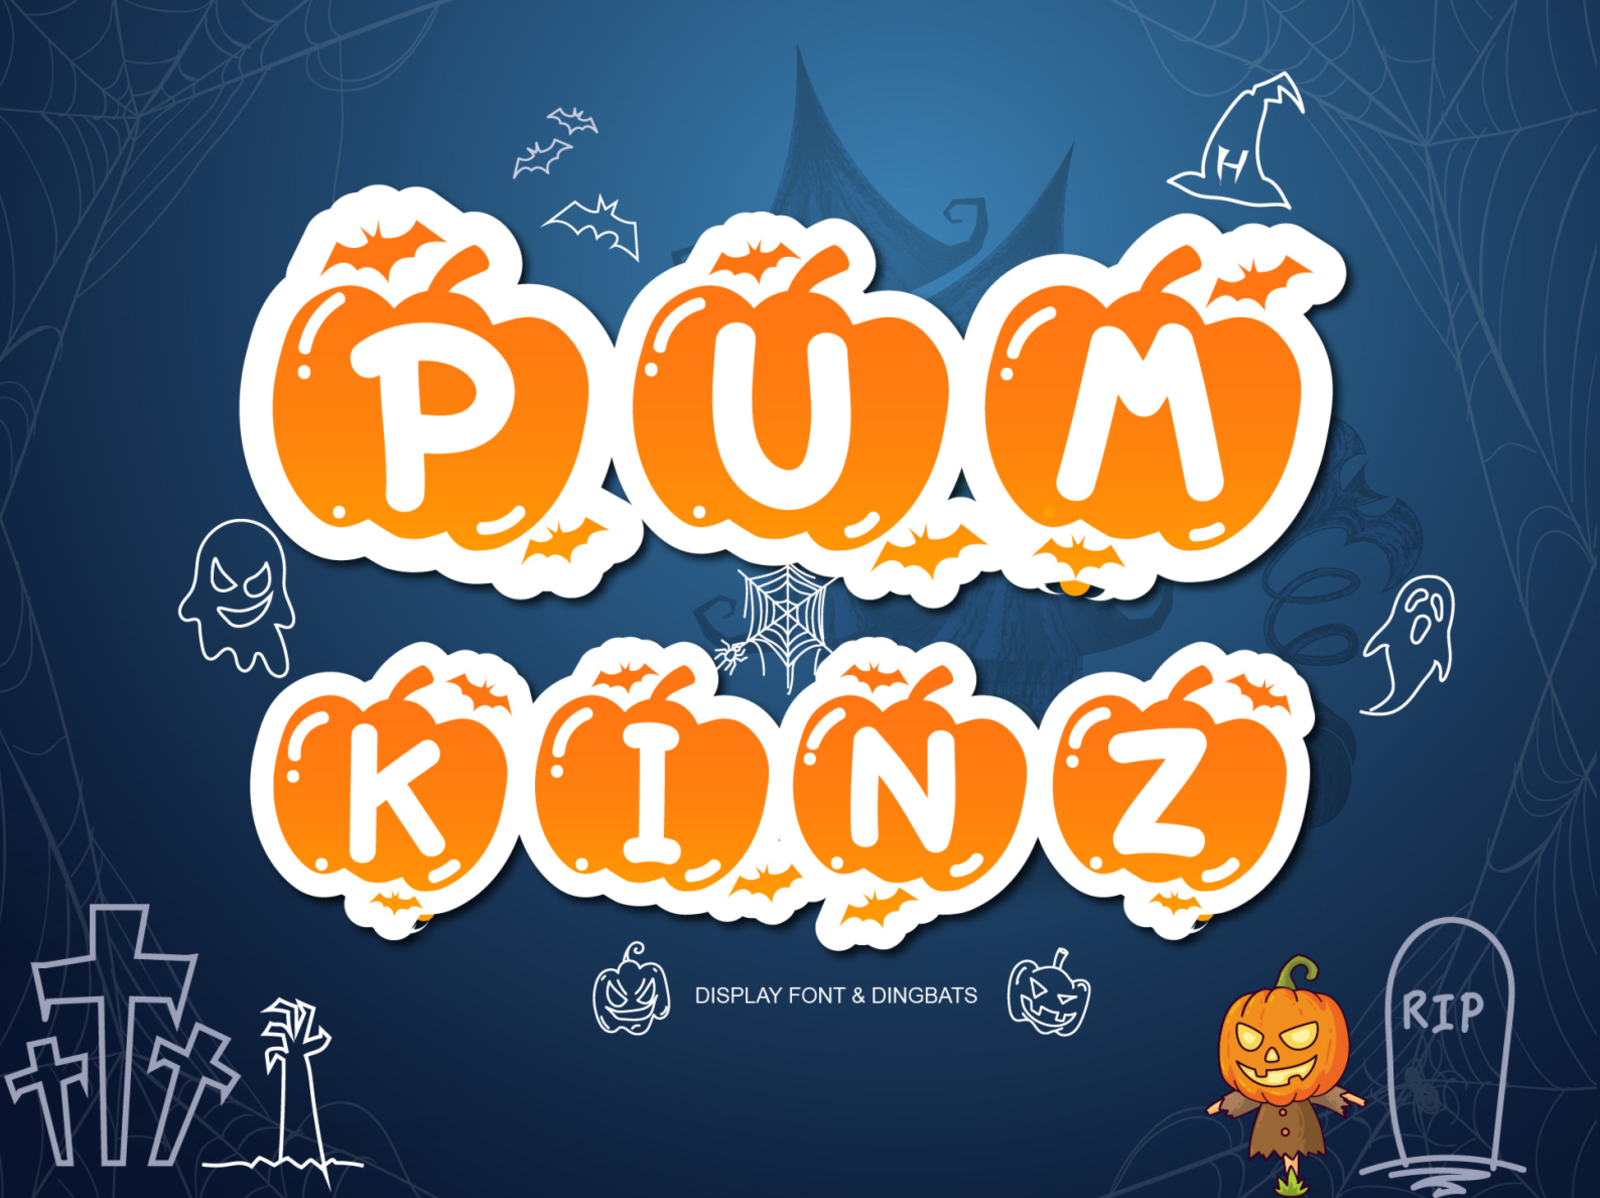 Download Free Pumkinz Dingbats Font By Supipat Chimwichian On Dribbble Fonts Typography